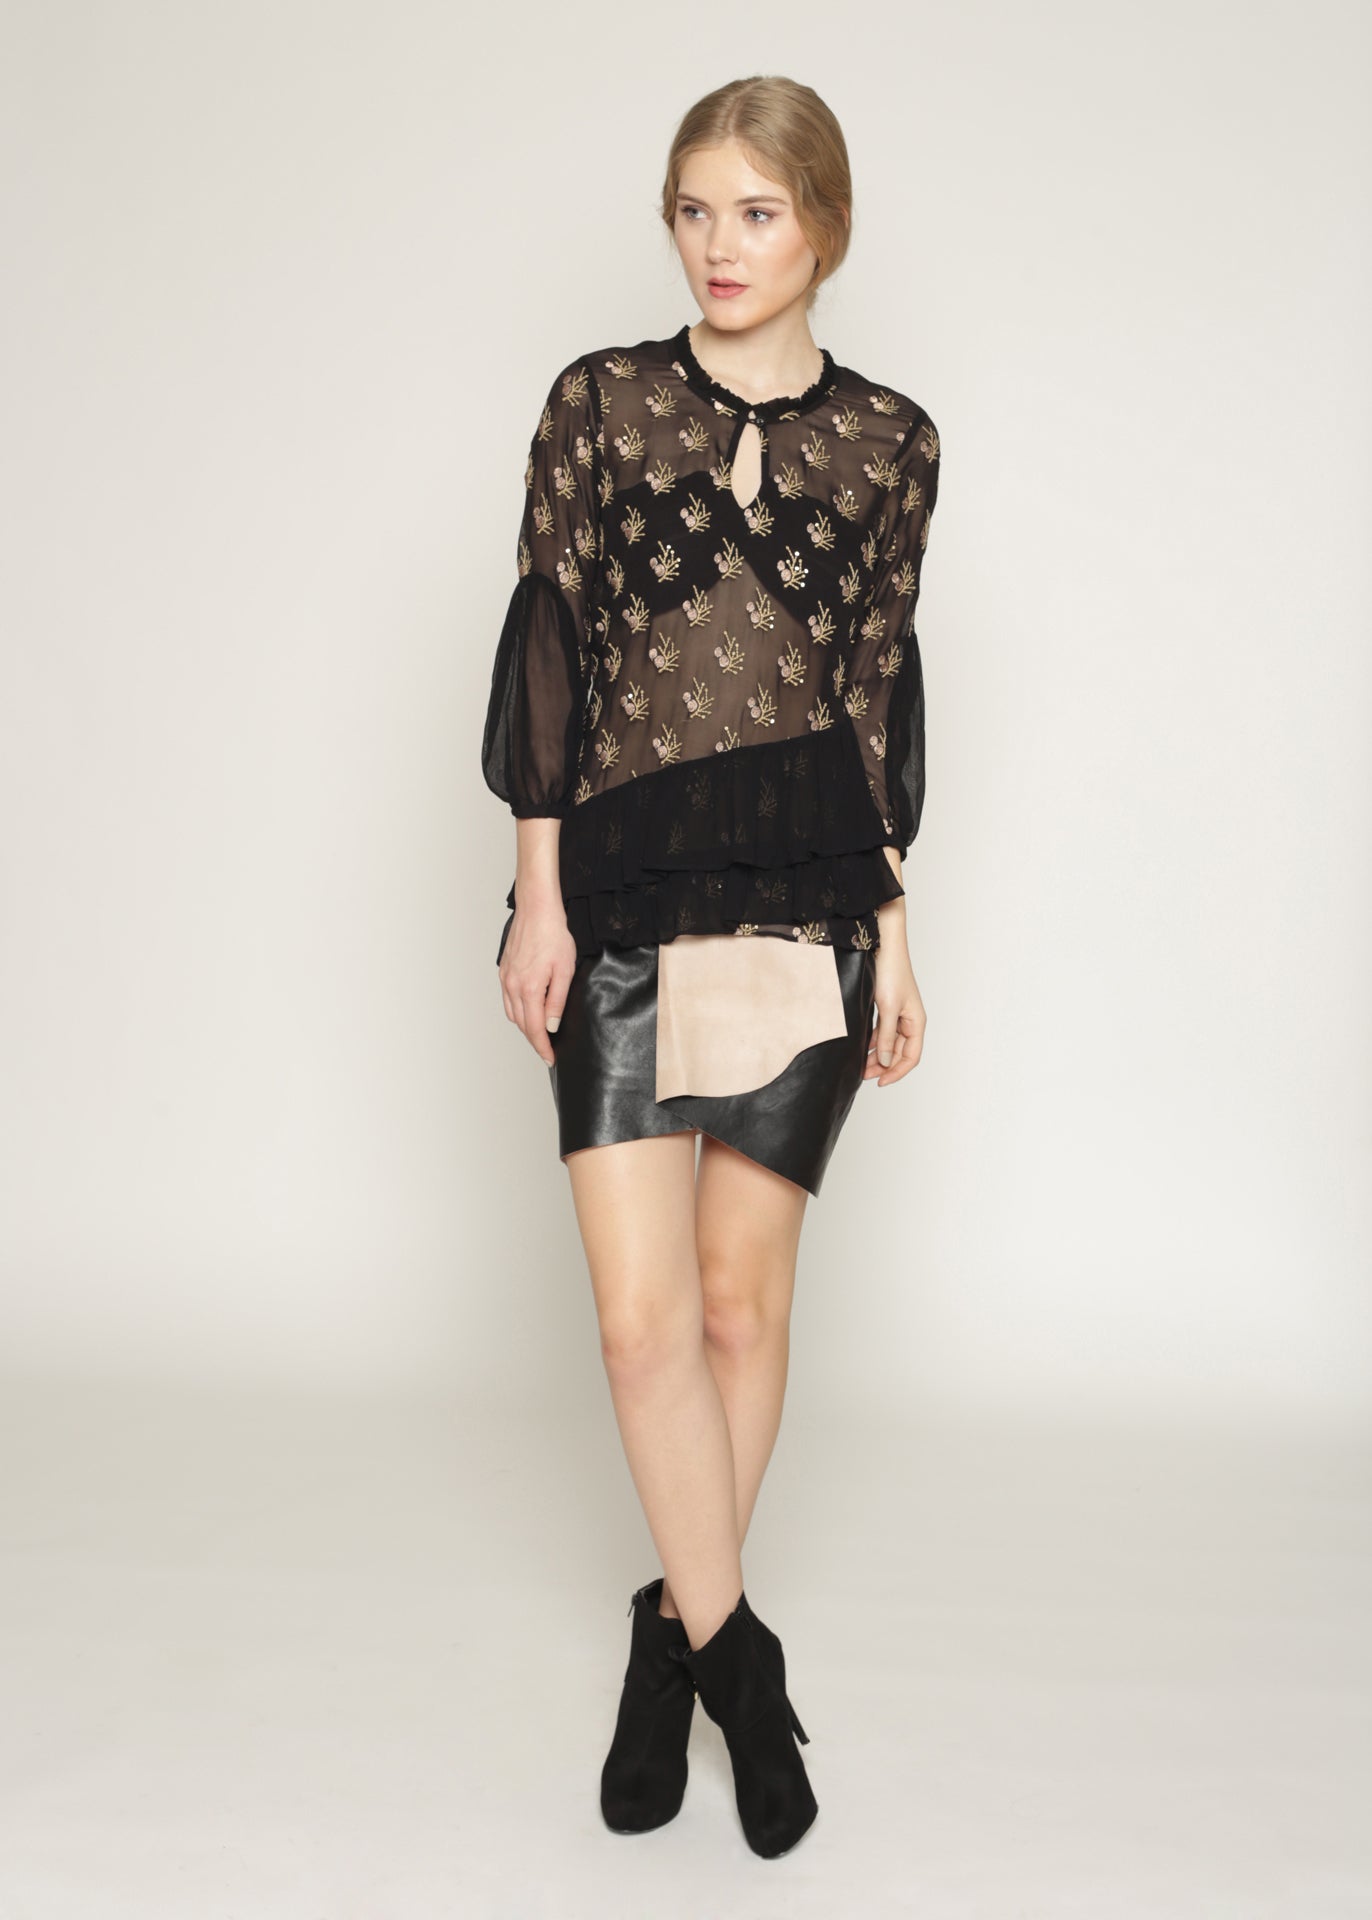 Sheer embroidered ruffle details party blouse